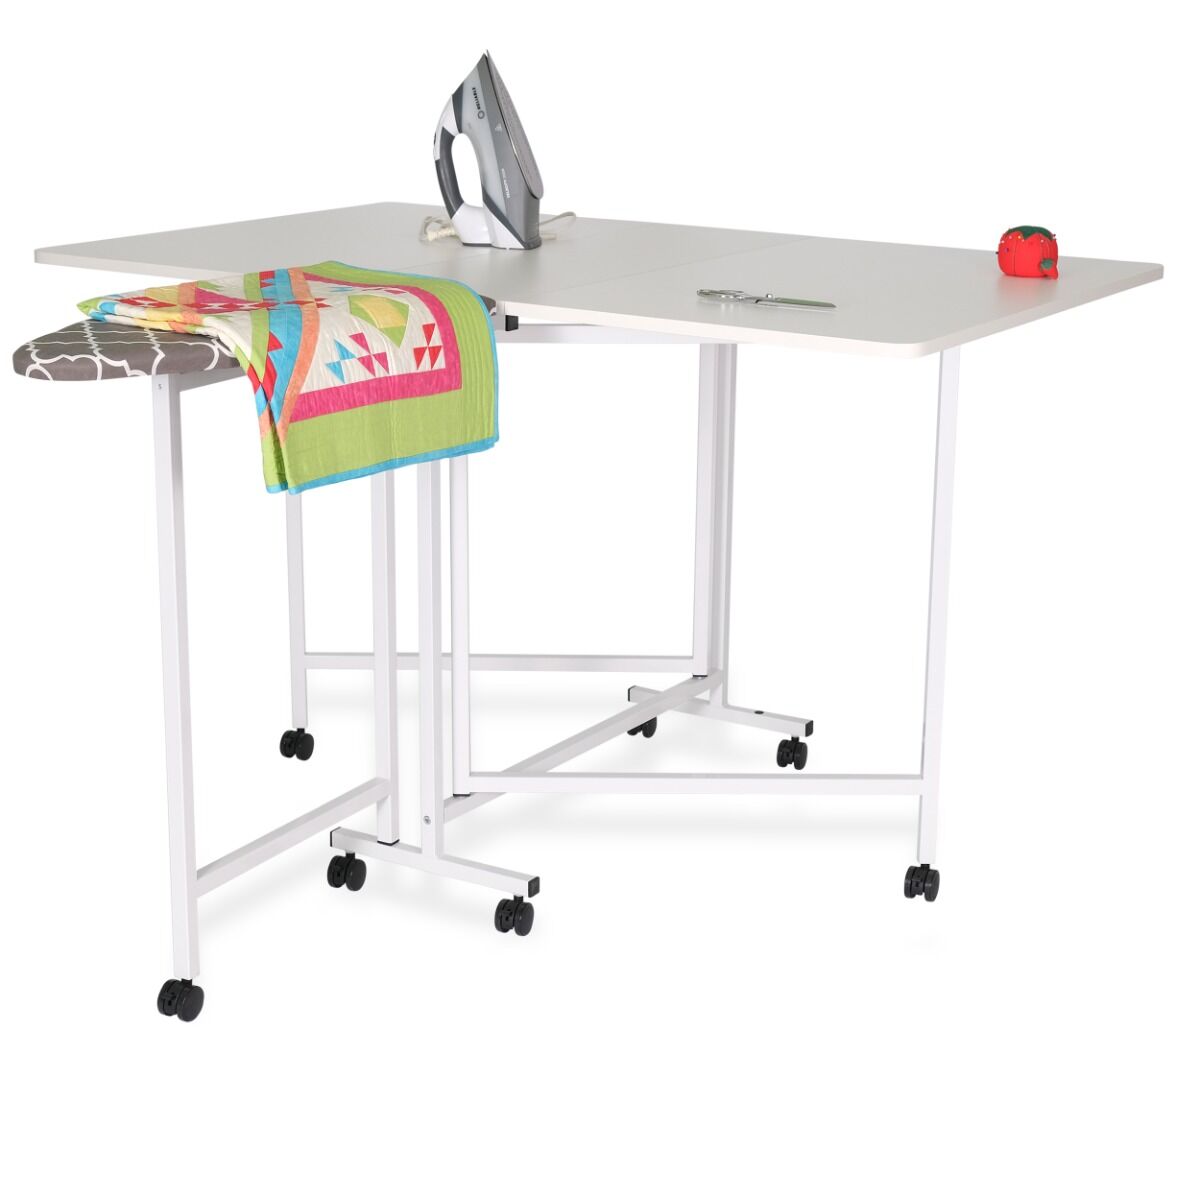 Arrow Millie Cutting and Ironing Table ,Arrow Millie Cutting and Ironing Table ,Arrow Millie Cutting and Ironing Table ,Arrow Millie Cutting and Ironing Table ,Arrow Millie Cutting and Ironing Table ,Arrow Millie Cutting and Ironing Table ,Arrow Millie Cutting and Ironing Table (accessories not included),Arrow Millie Cutting Mat